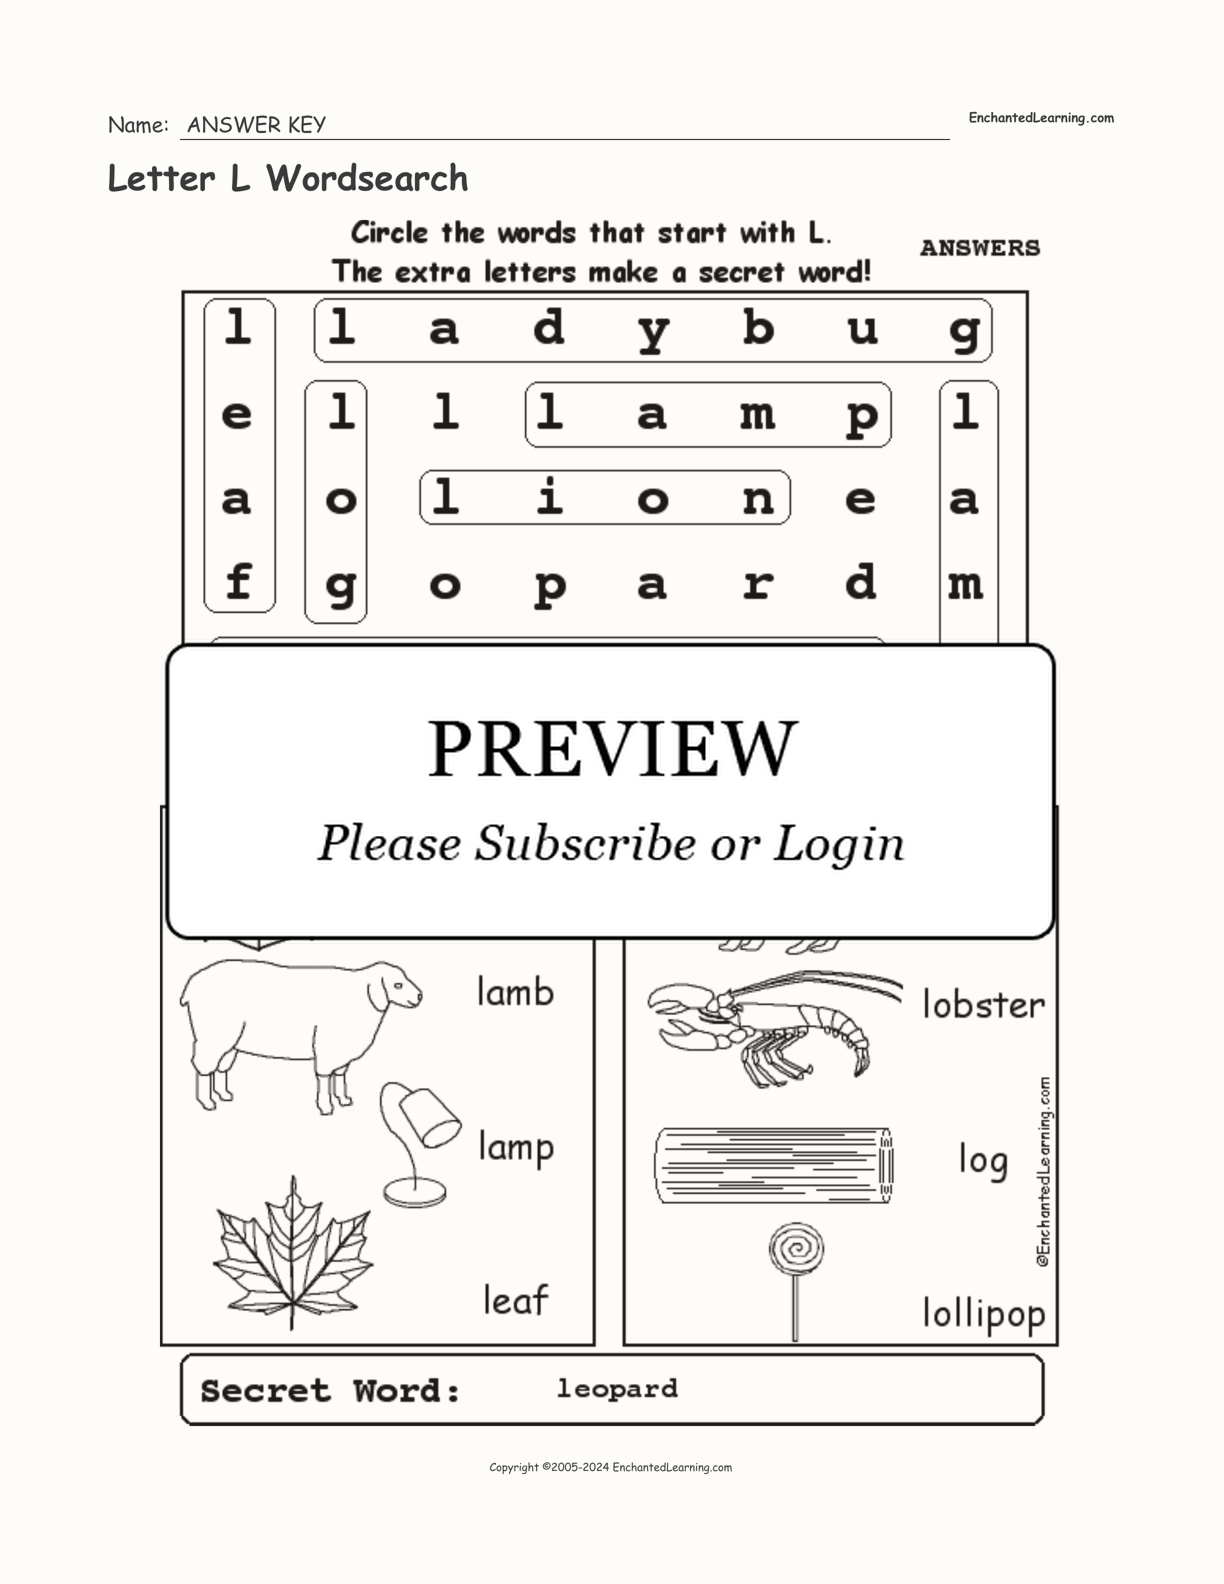 Letter L Wordsearch interactive worksheet page 2